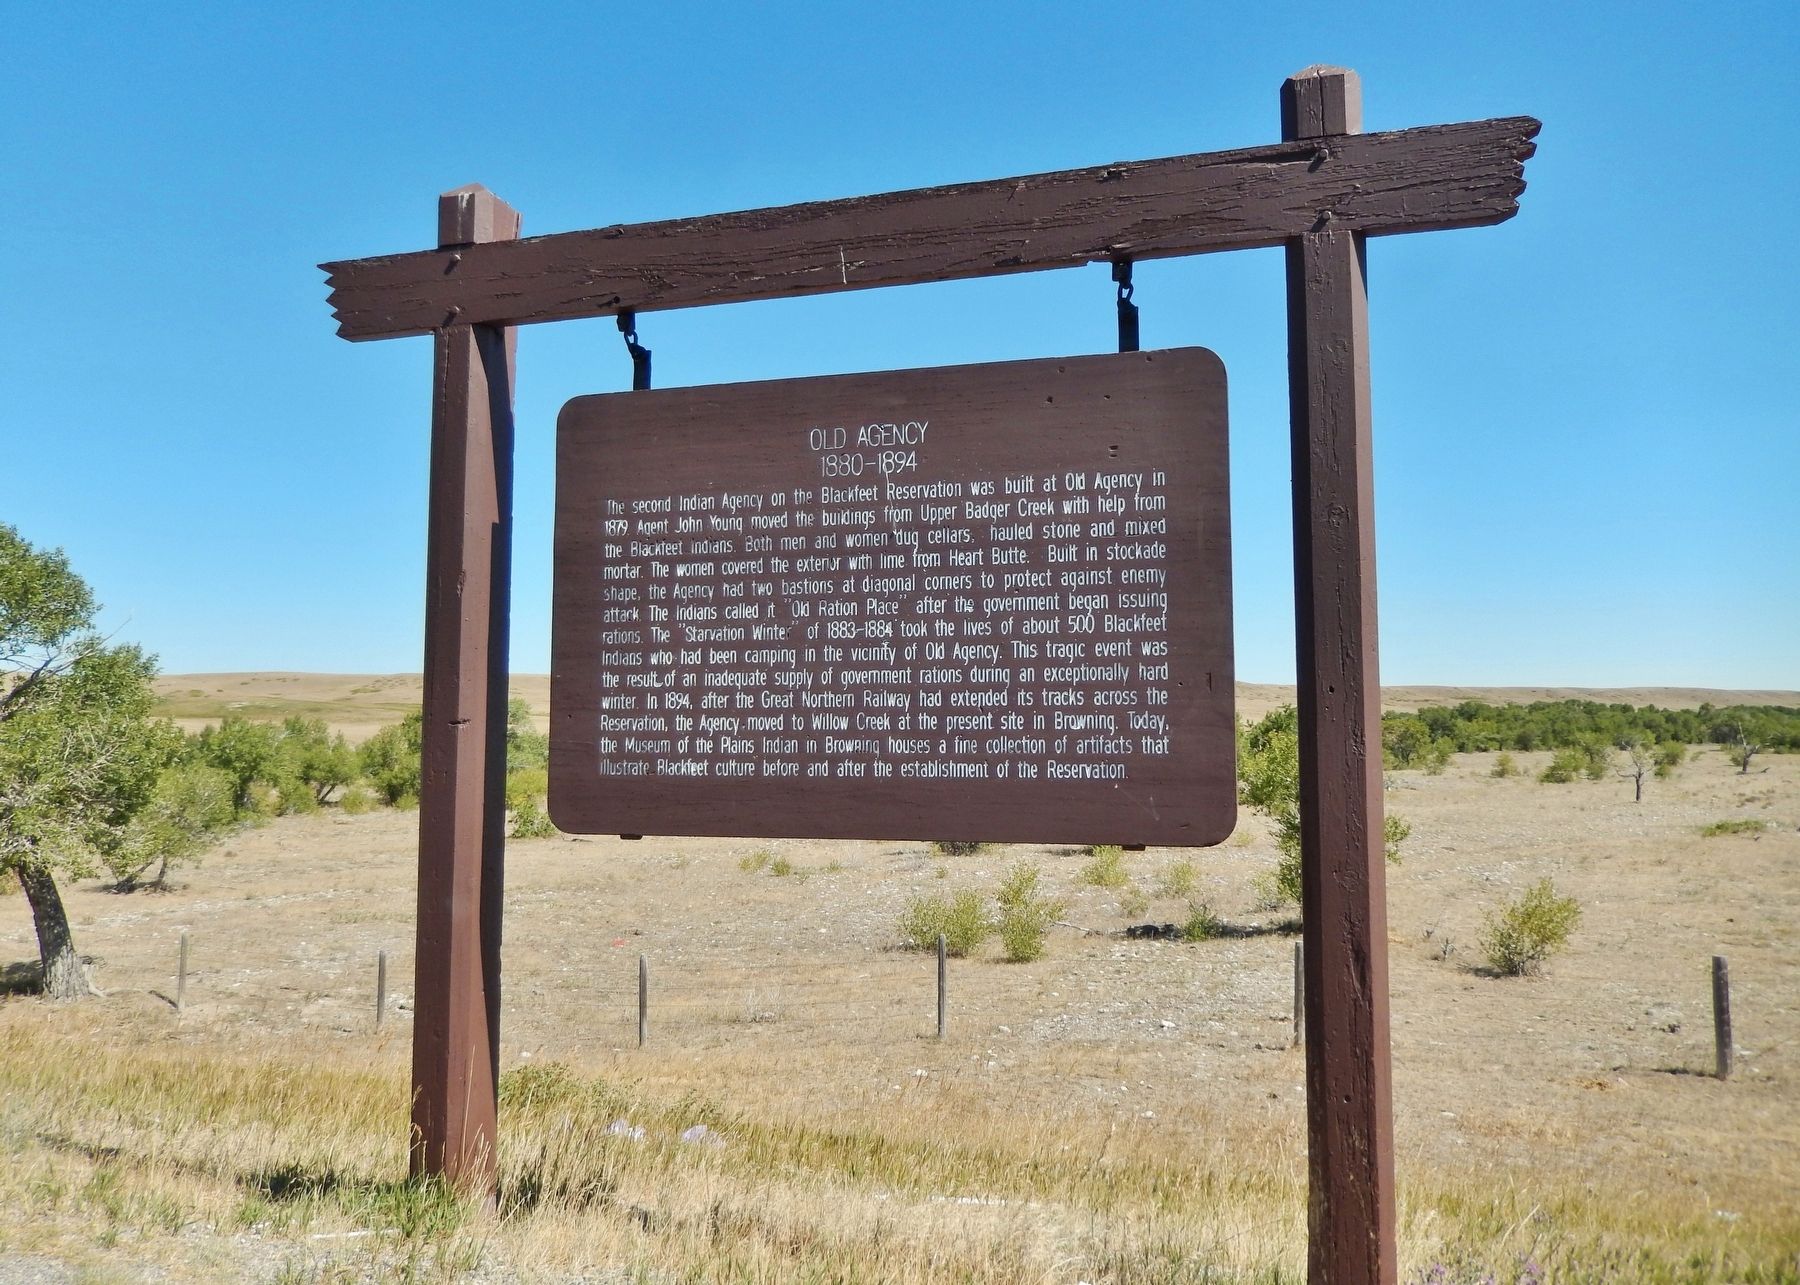 Old Agency Marker (<i>wide view</i>) image. Click for full size.